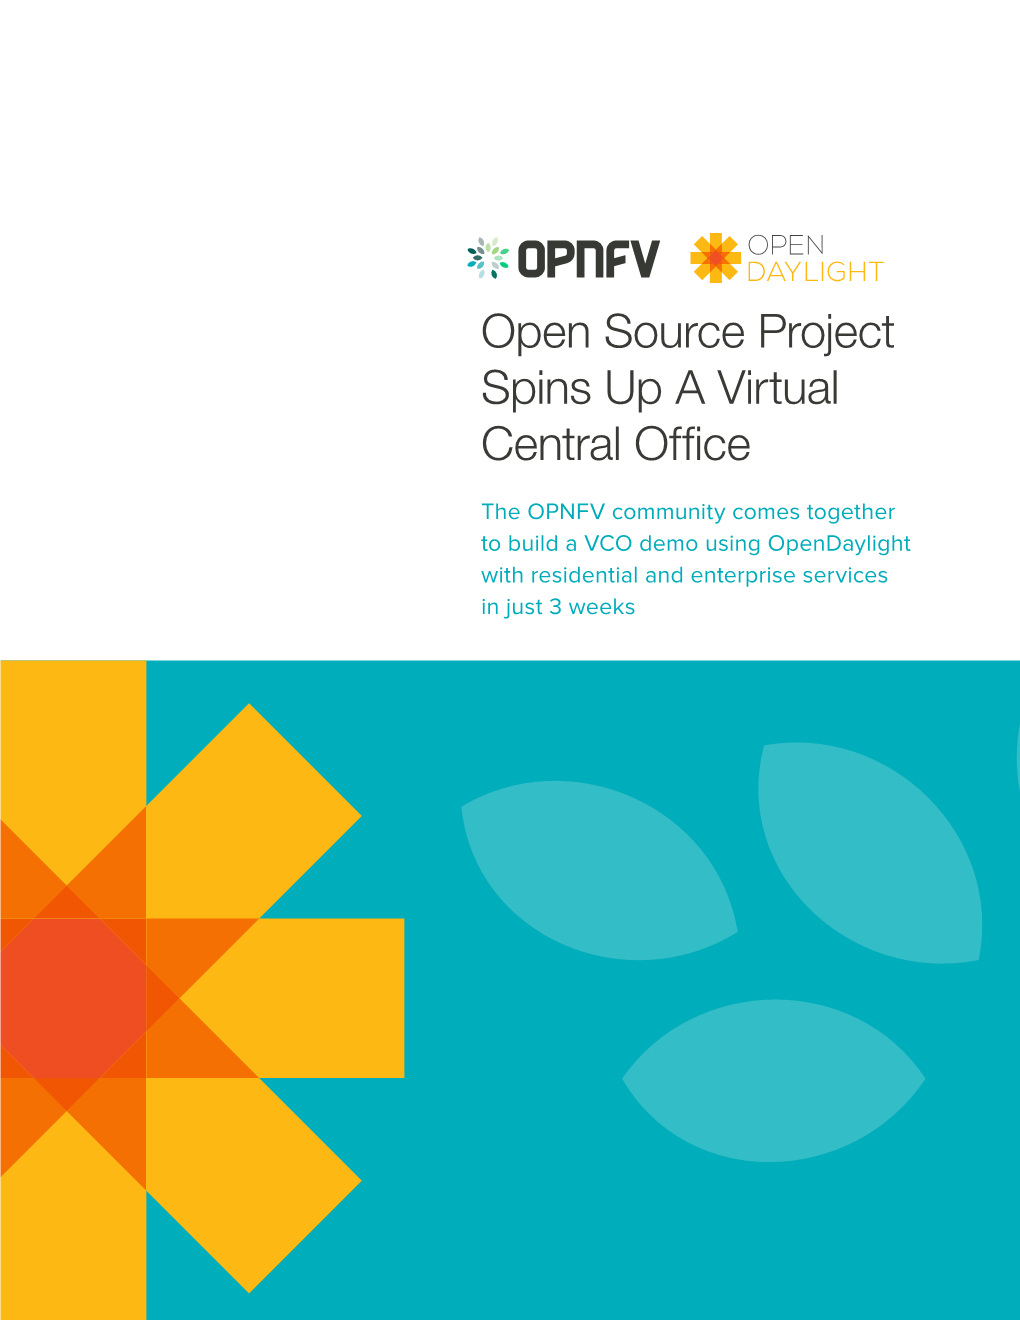 Open Source Project Spins up a Virtual Central Office